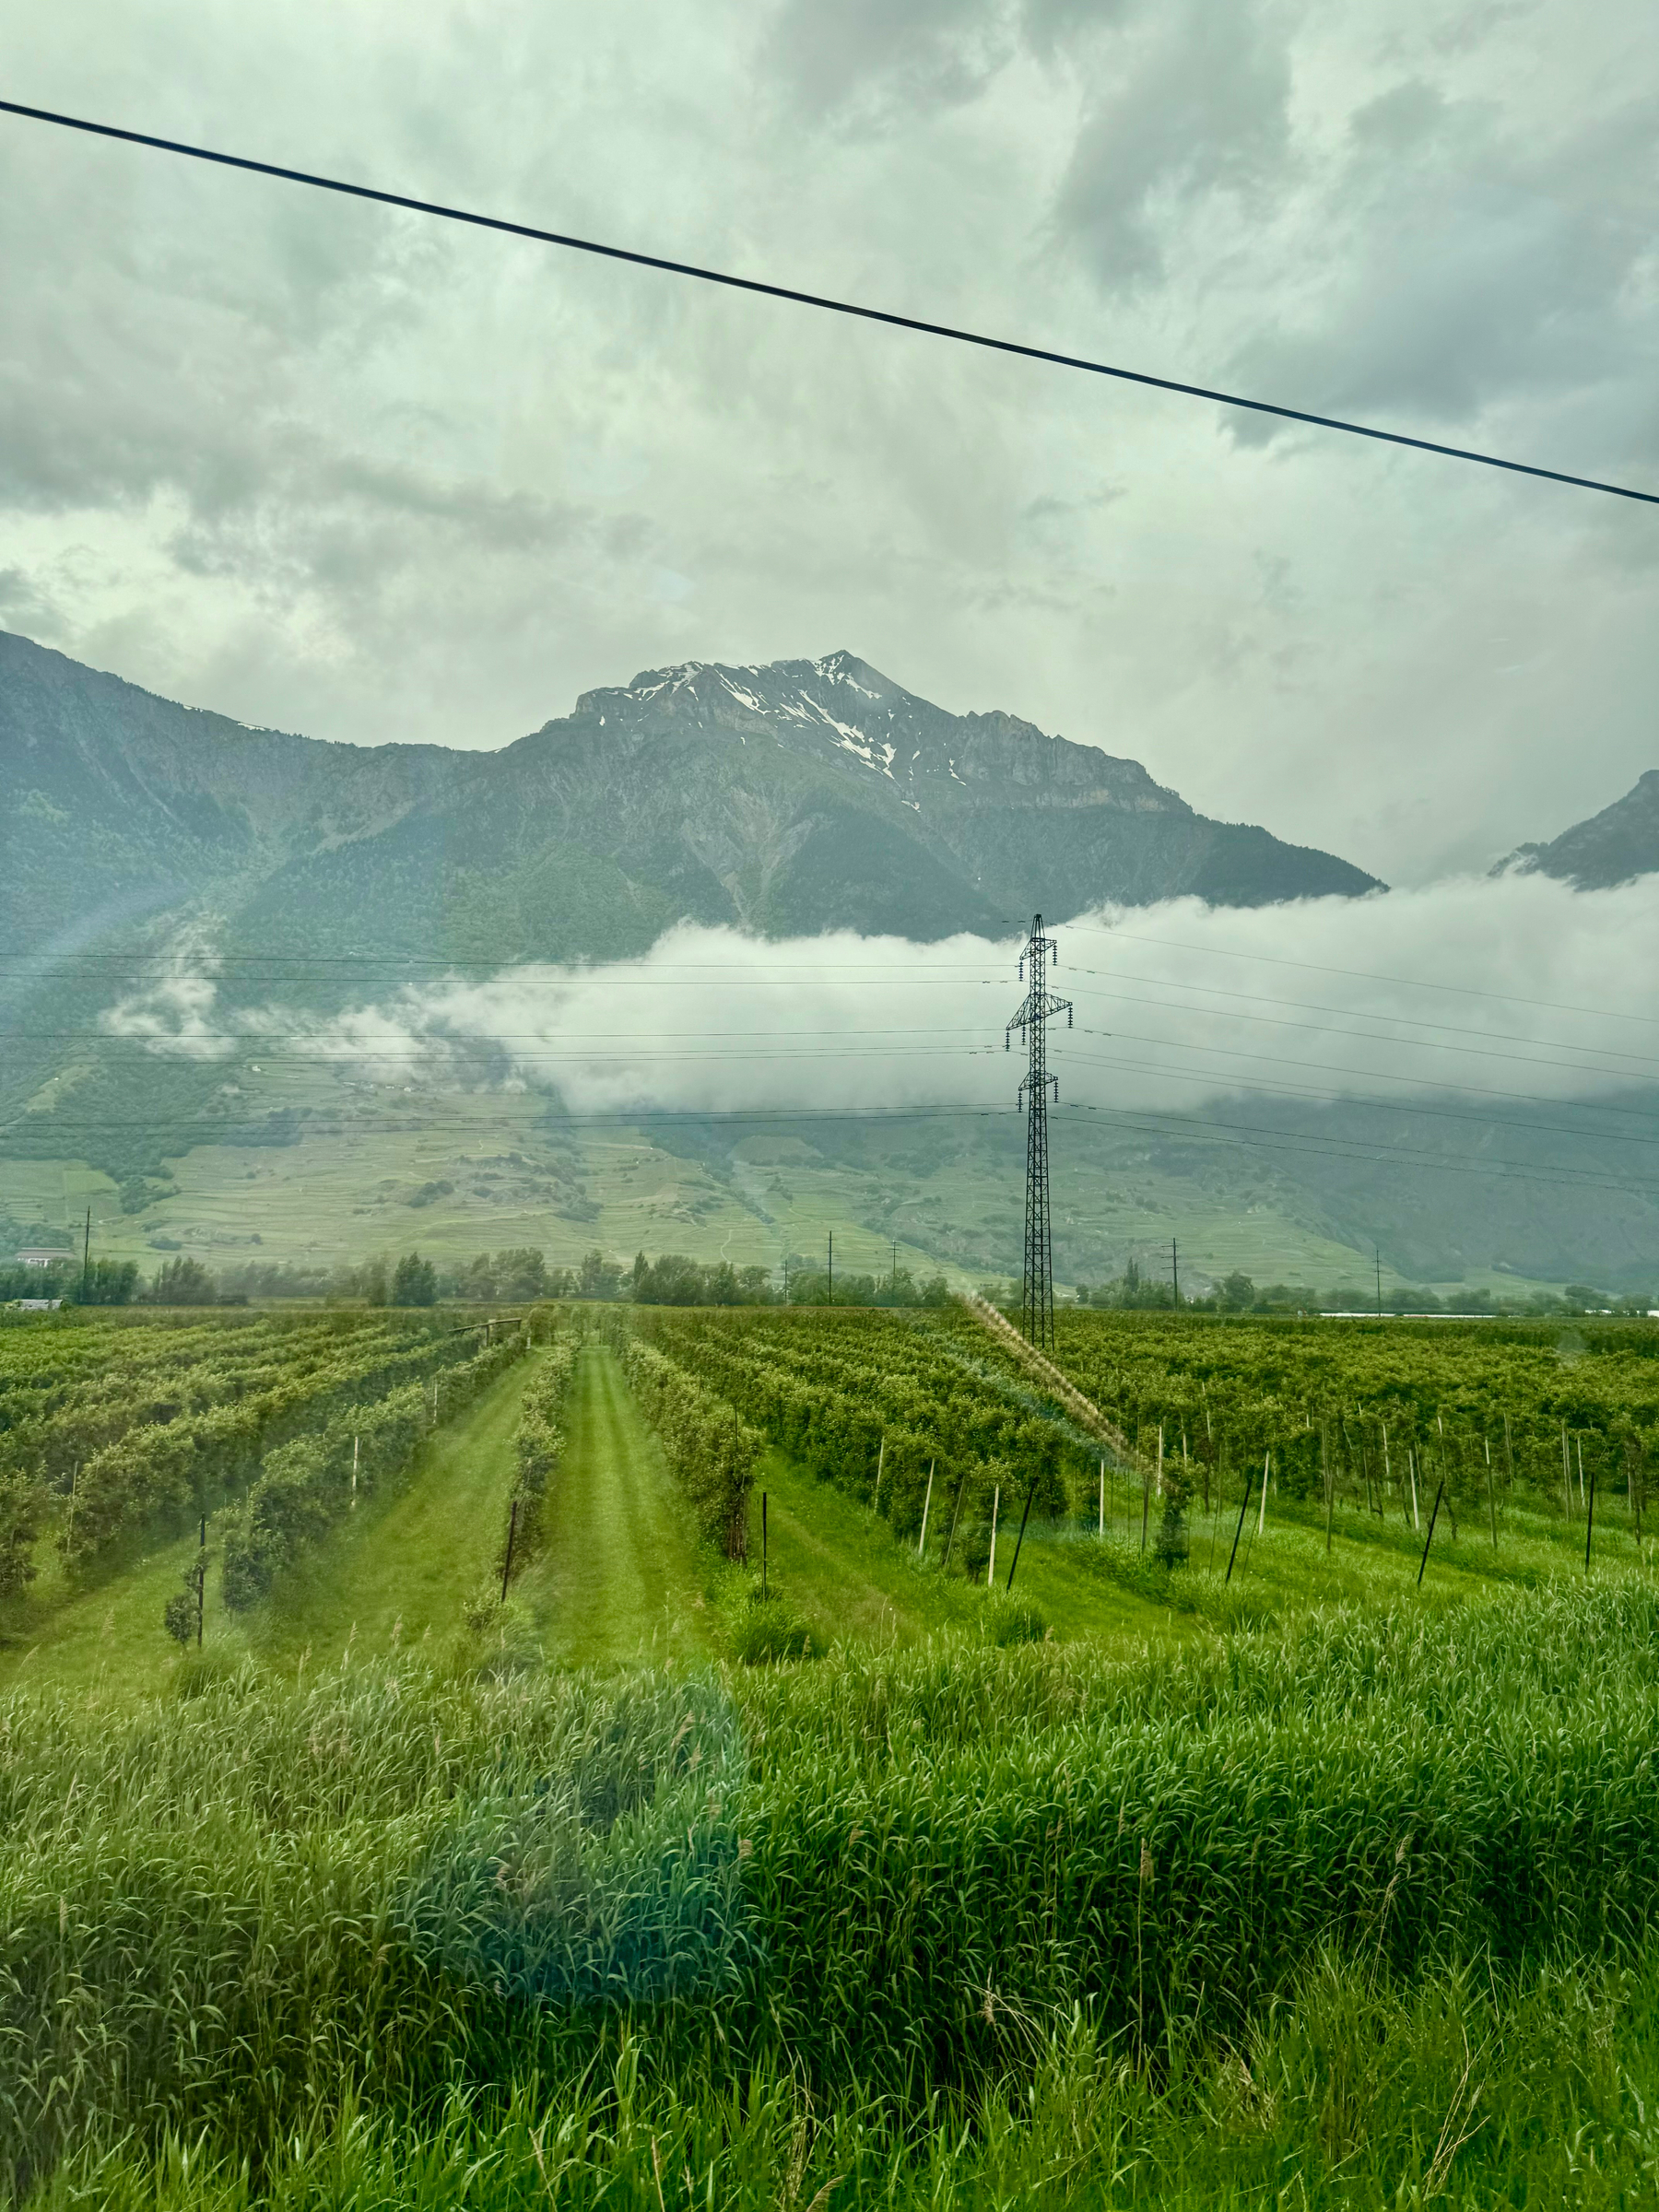 A scenic landscape featuring a lush green field, possibly a vineyard, with rows of plants leading towards a mountain range in the background. Low clouds or mist partly envelop the lower section of the mountains, and an electricity pylon stands on the right side